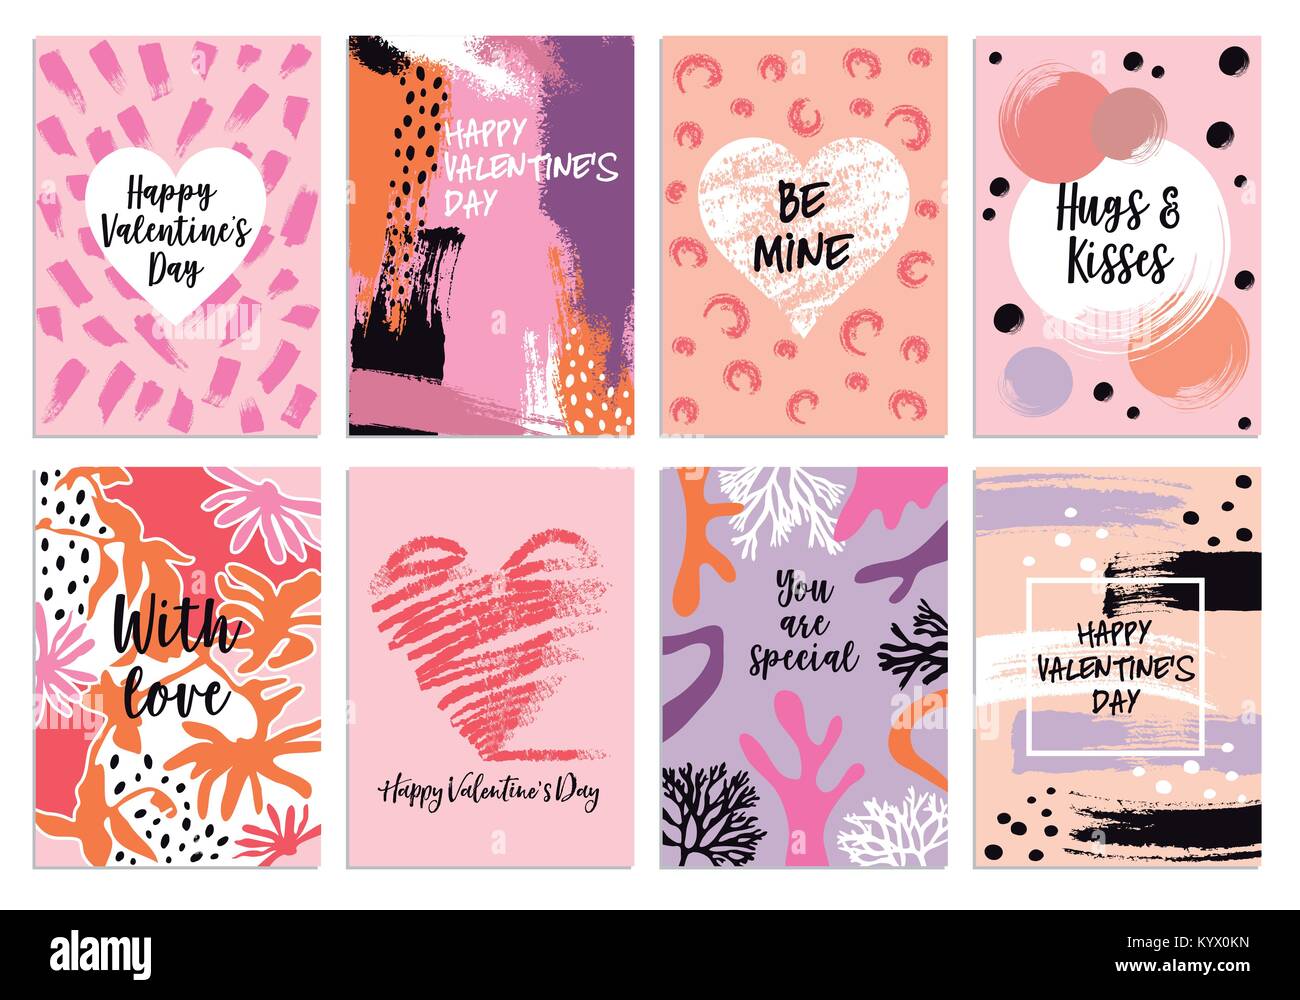 Valentine's day s card temaplates with abstract hand drawn pattern, set of vector graphic design elements Stock Vector